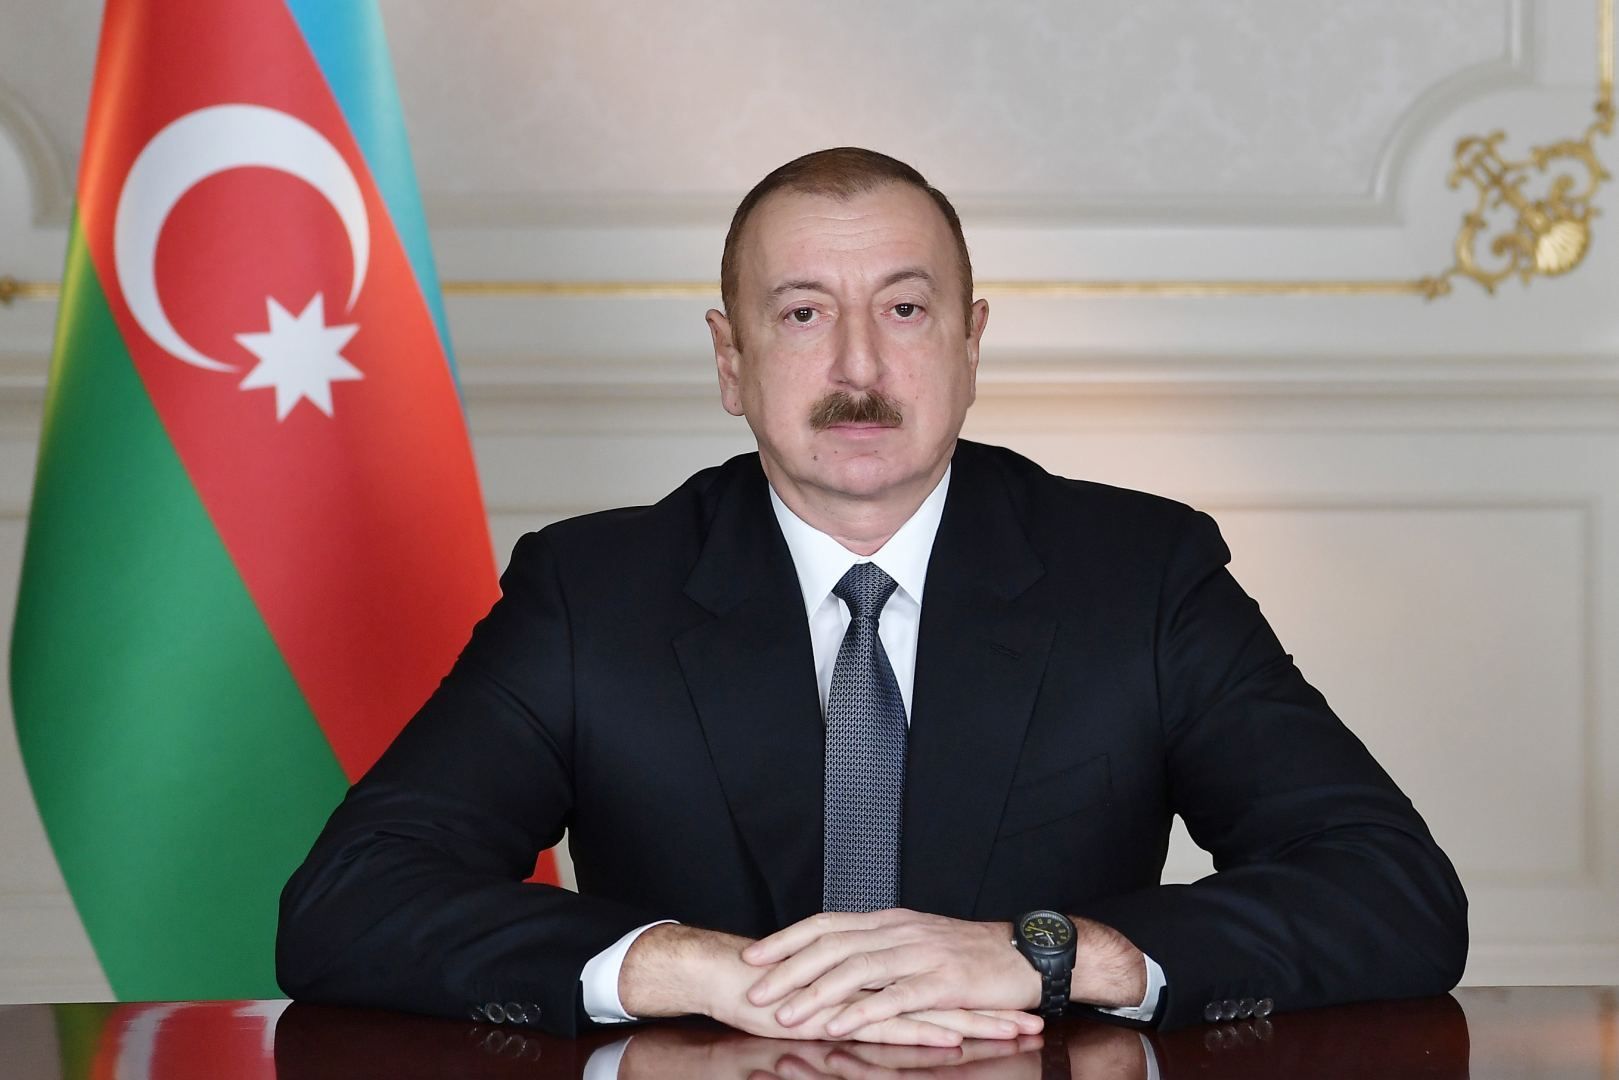 Azerbaijan awards National Archive Department's head with order "For merit to Motherland" of II degree - decree